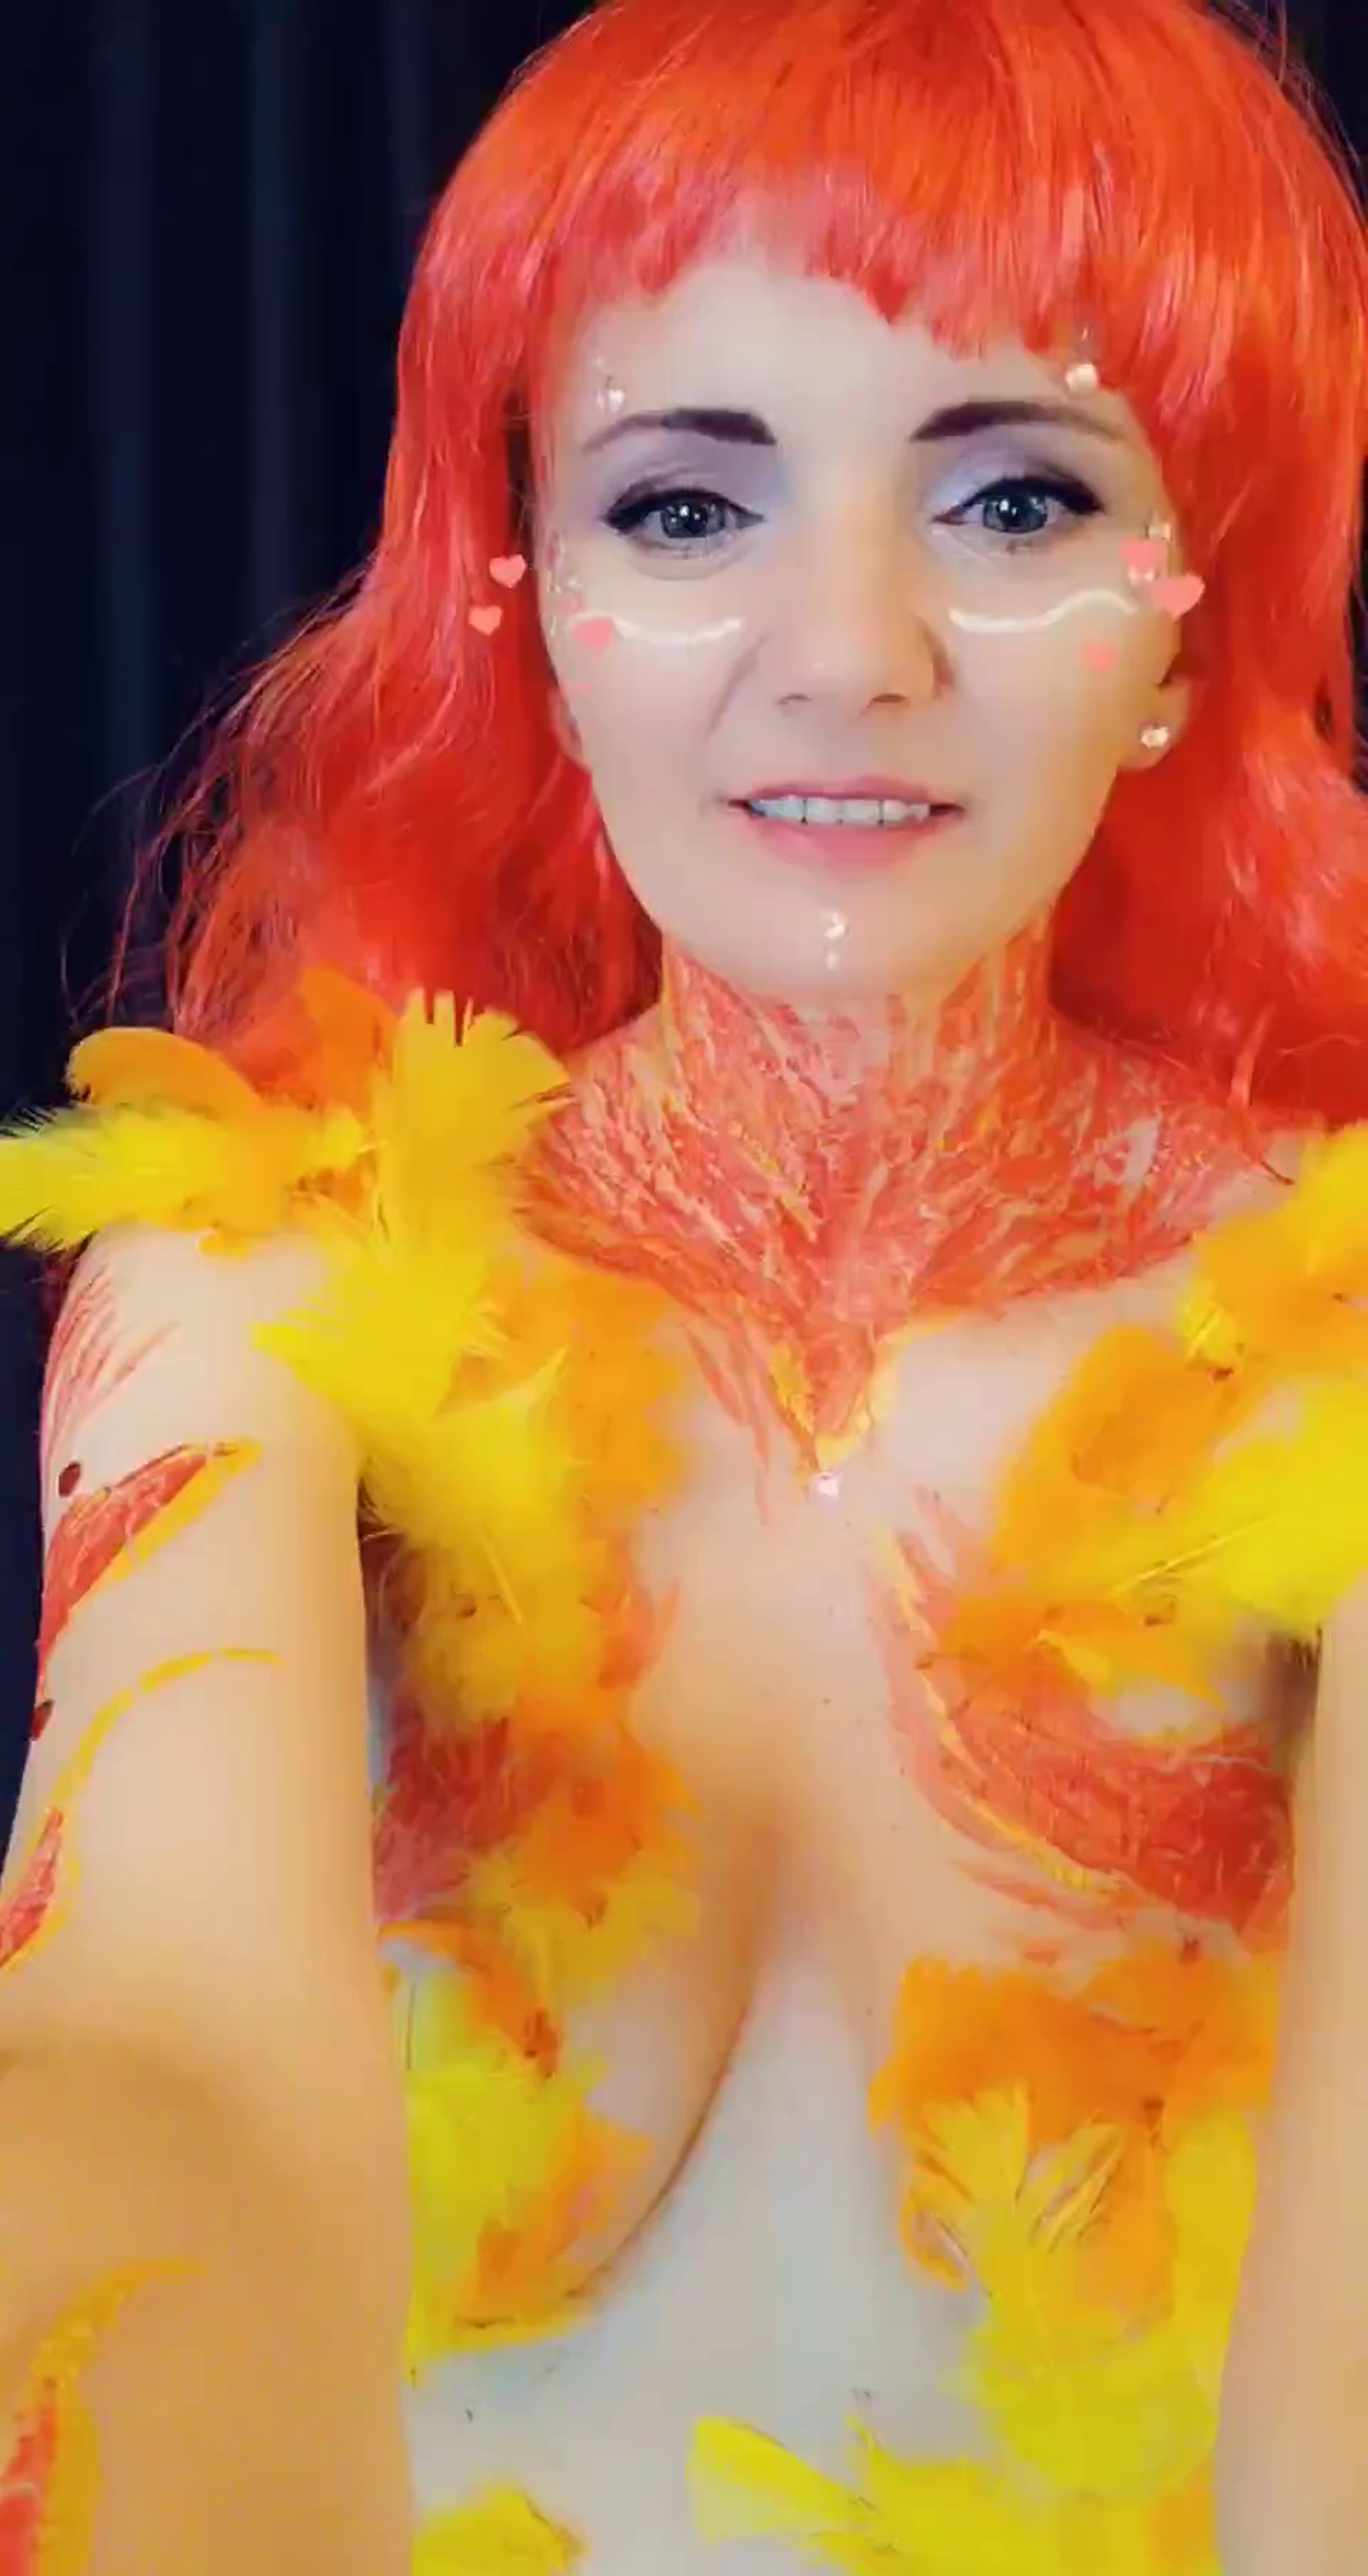 Video post by LadyD'Anna